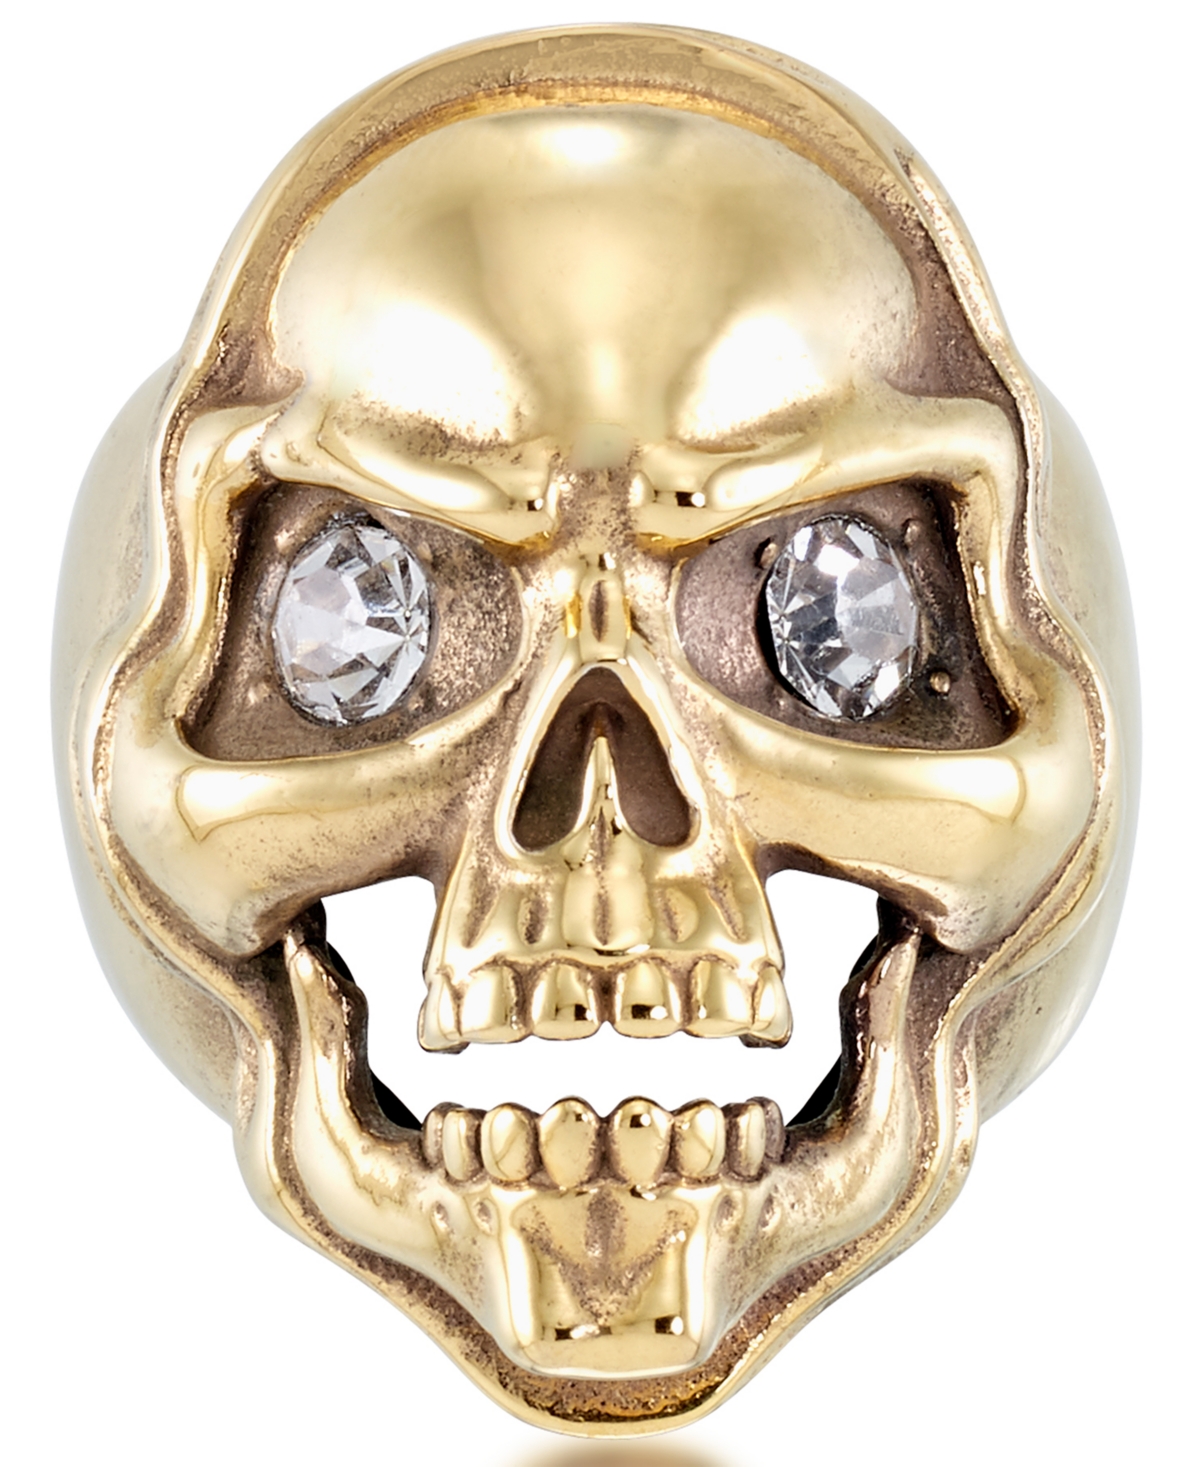 Andrew Charles by Andy Hilfiger Men's Cubic Zirconia Skull Ring in Yellow Ion-Plated Stainless Steel